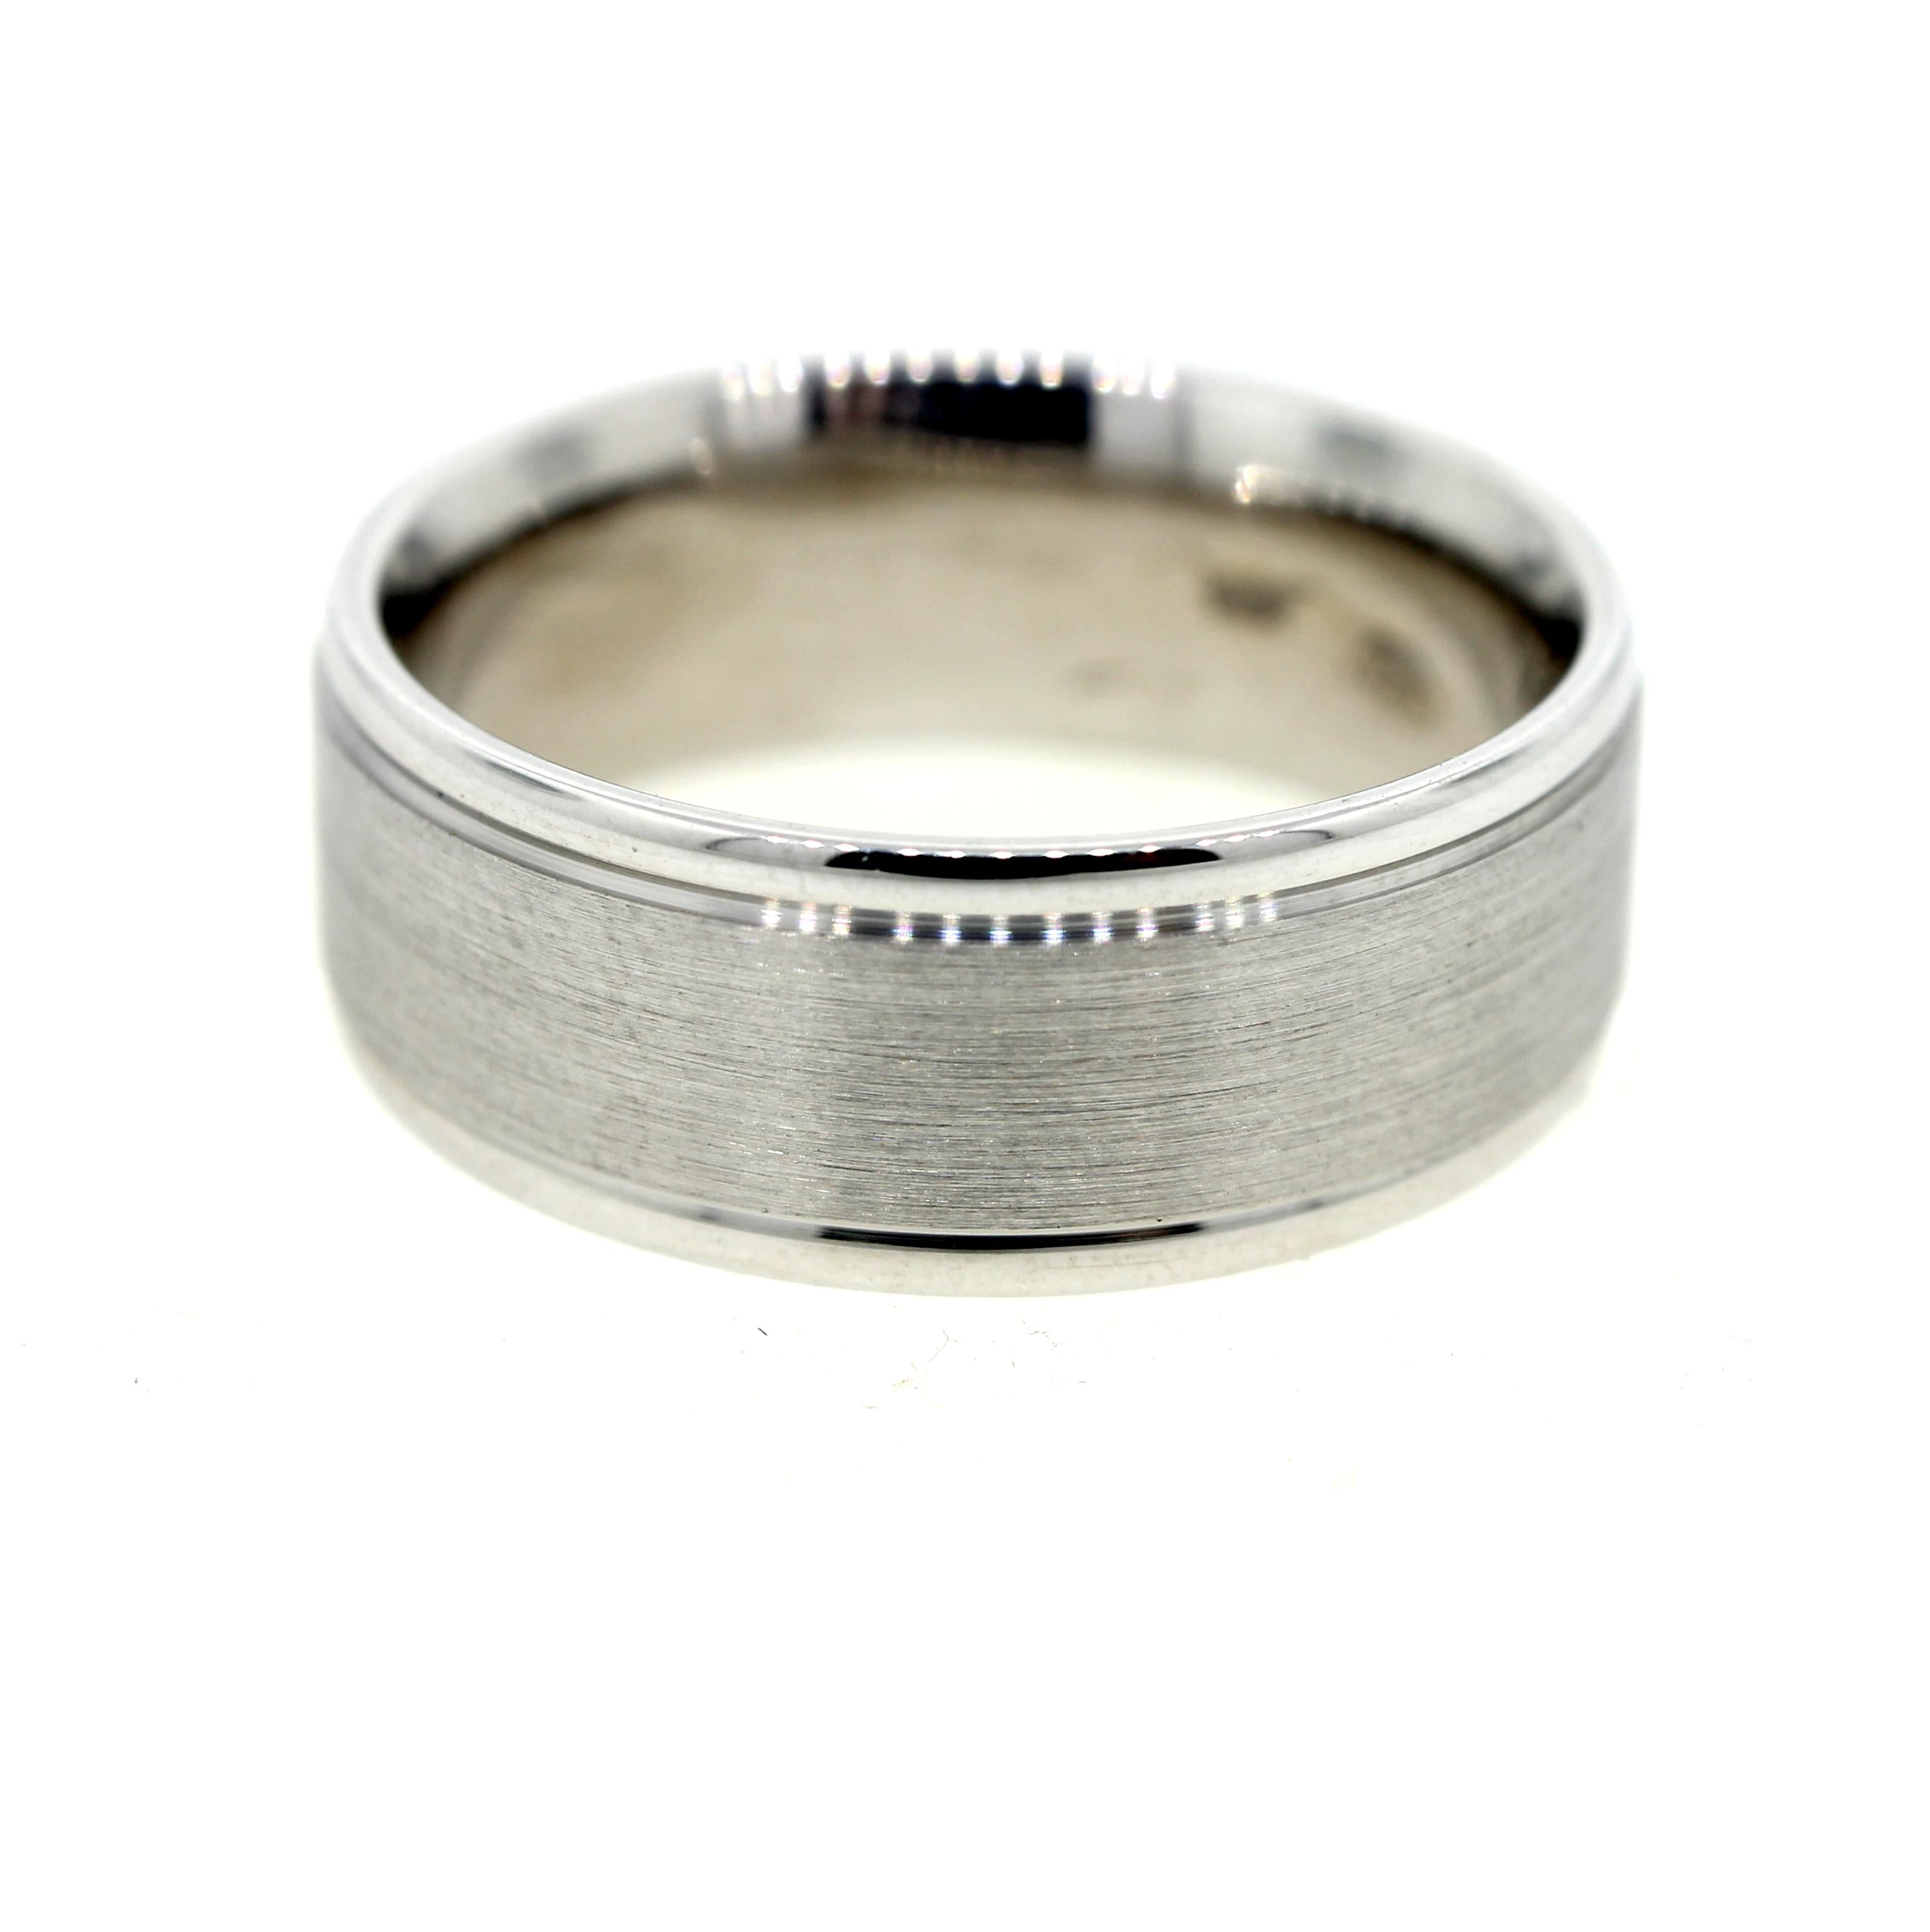 This men's brushed white gold wedding band featured high polish rounded edges for a contrasting look. 